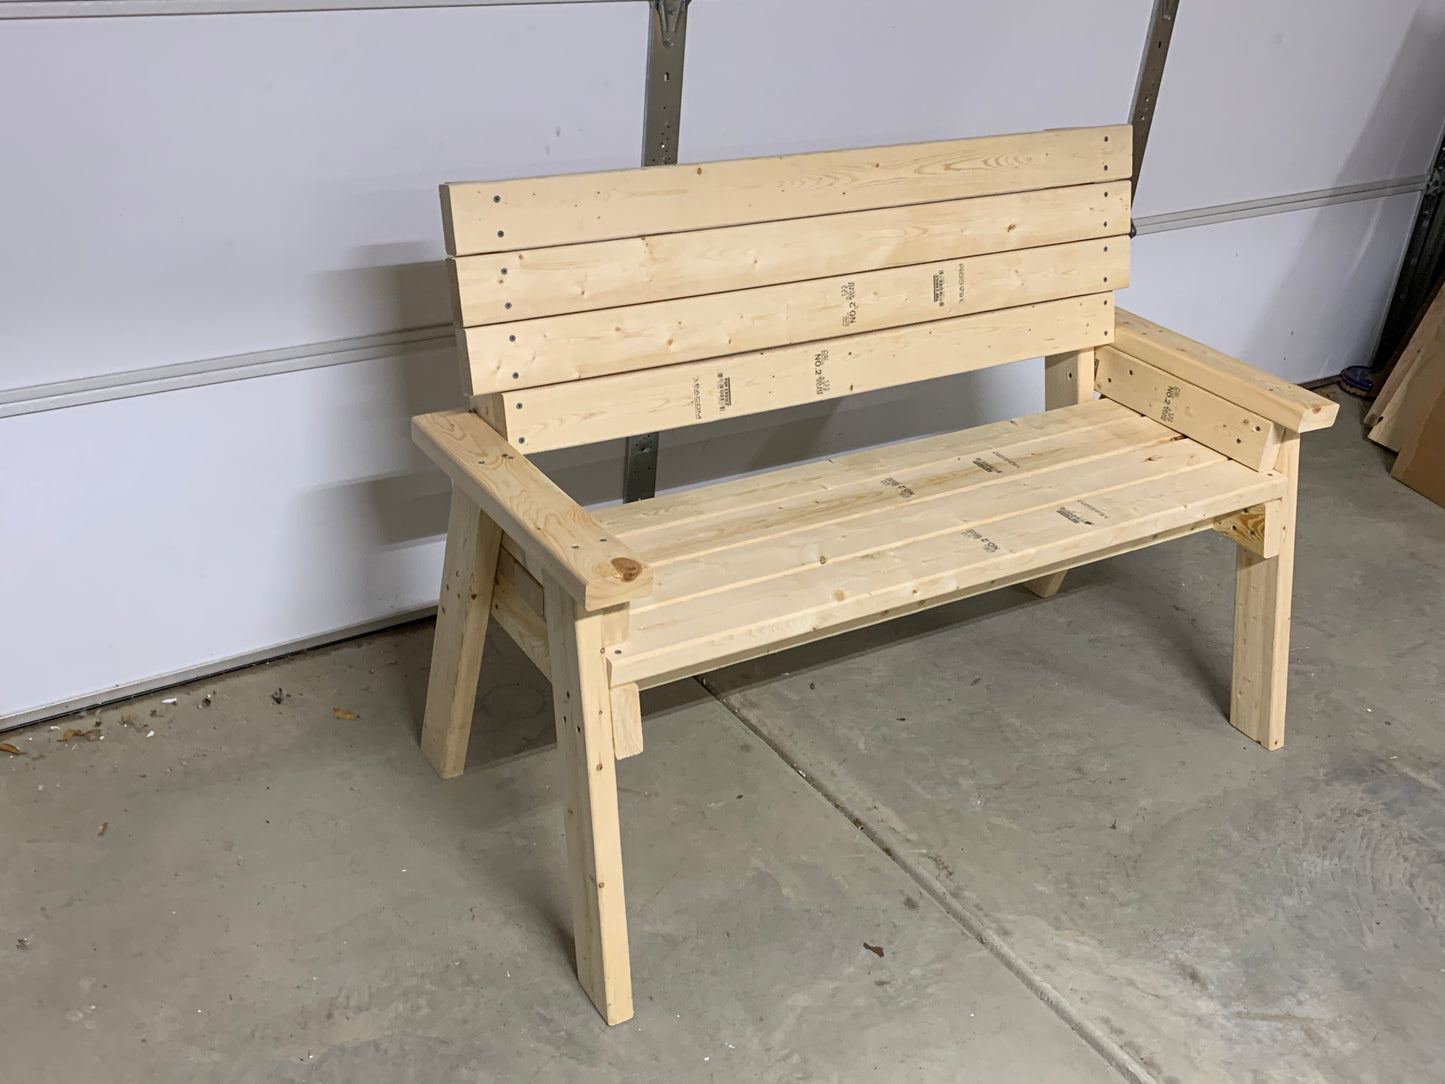 Park Bench Outdoor w/drink holders (white) custom colors available